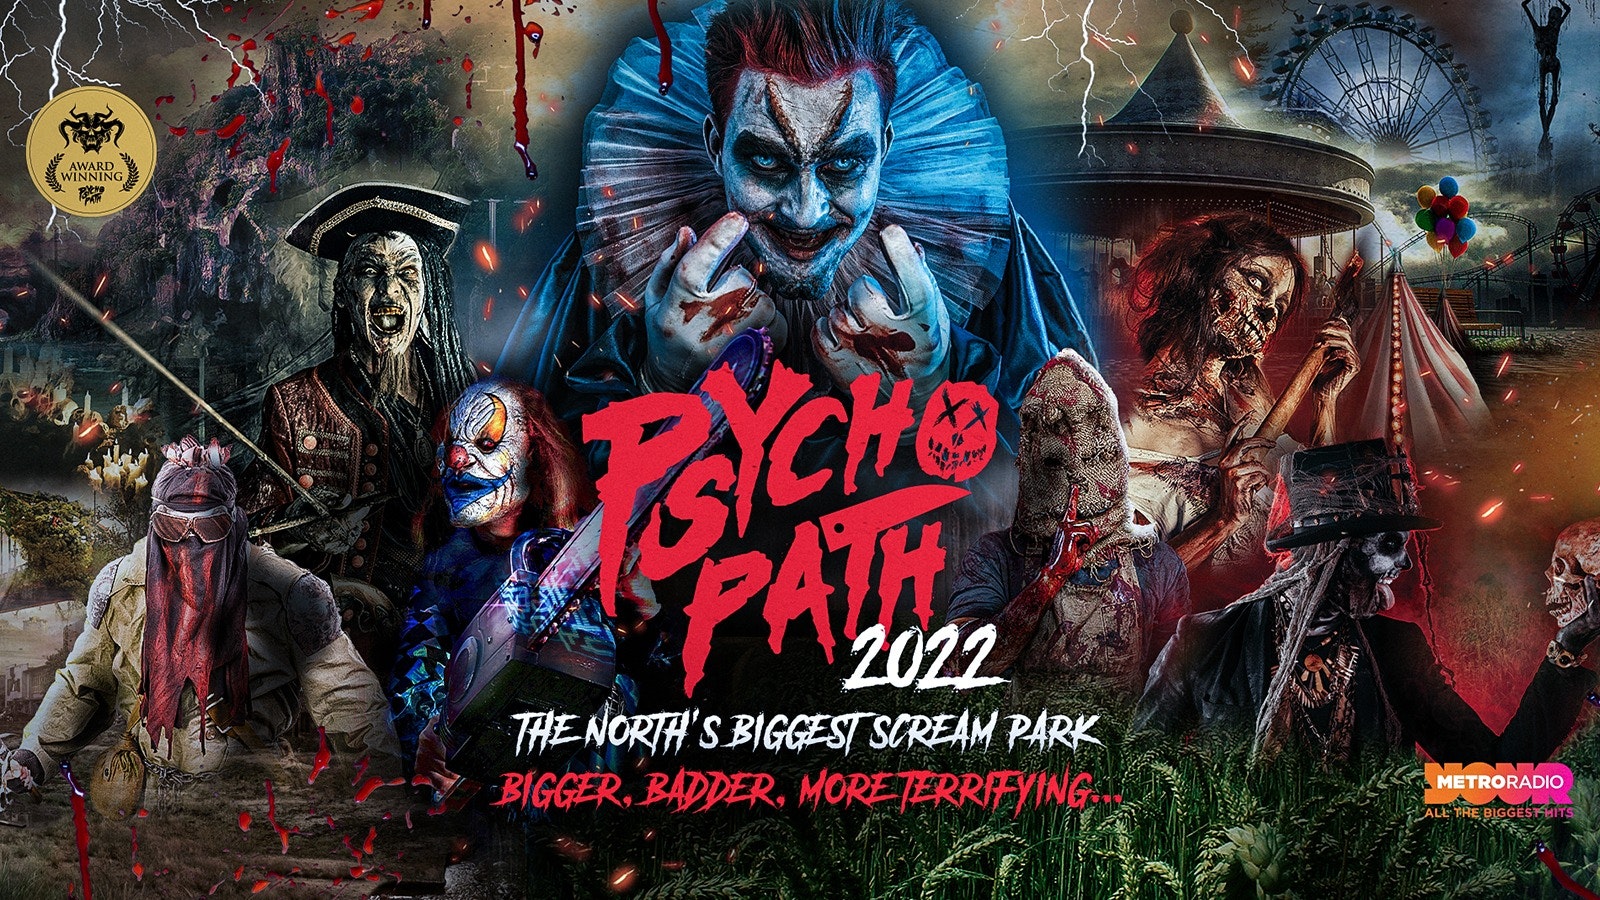 Psycho Path Presents FearGround – Oct 14th